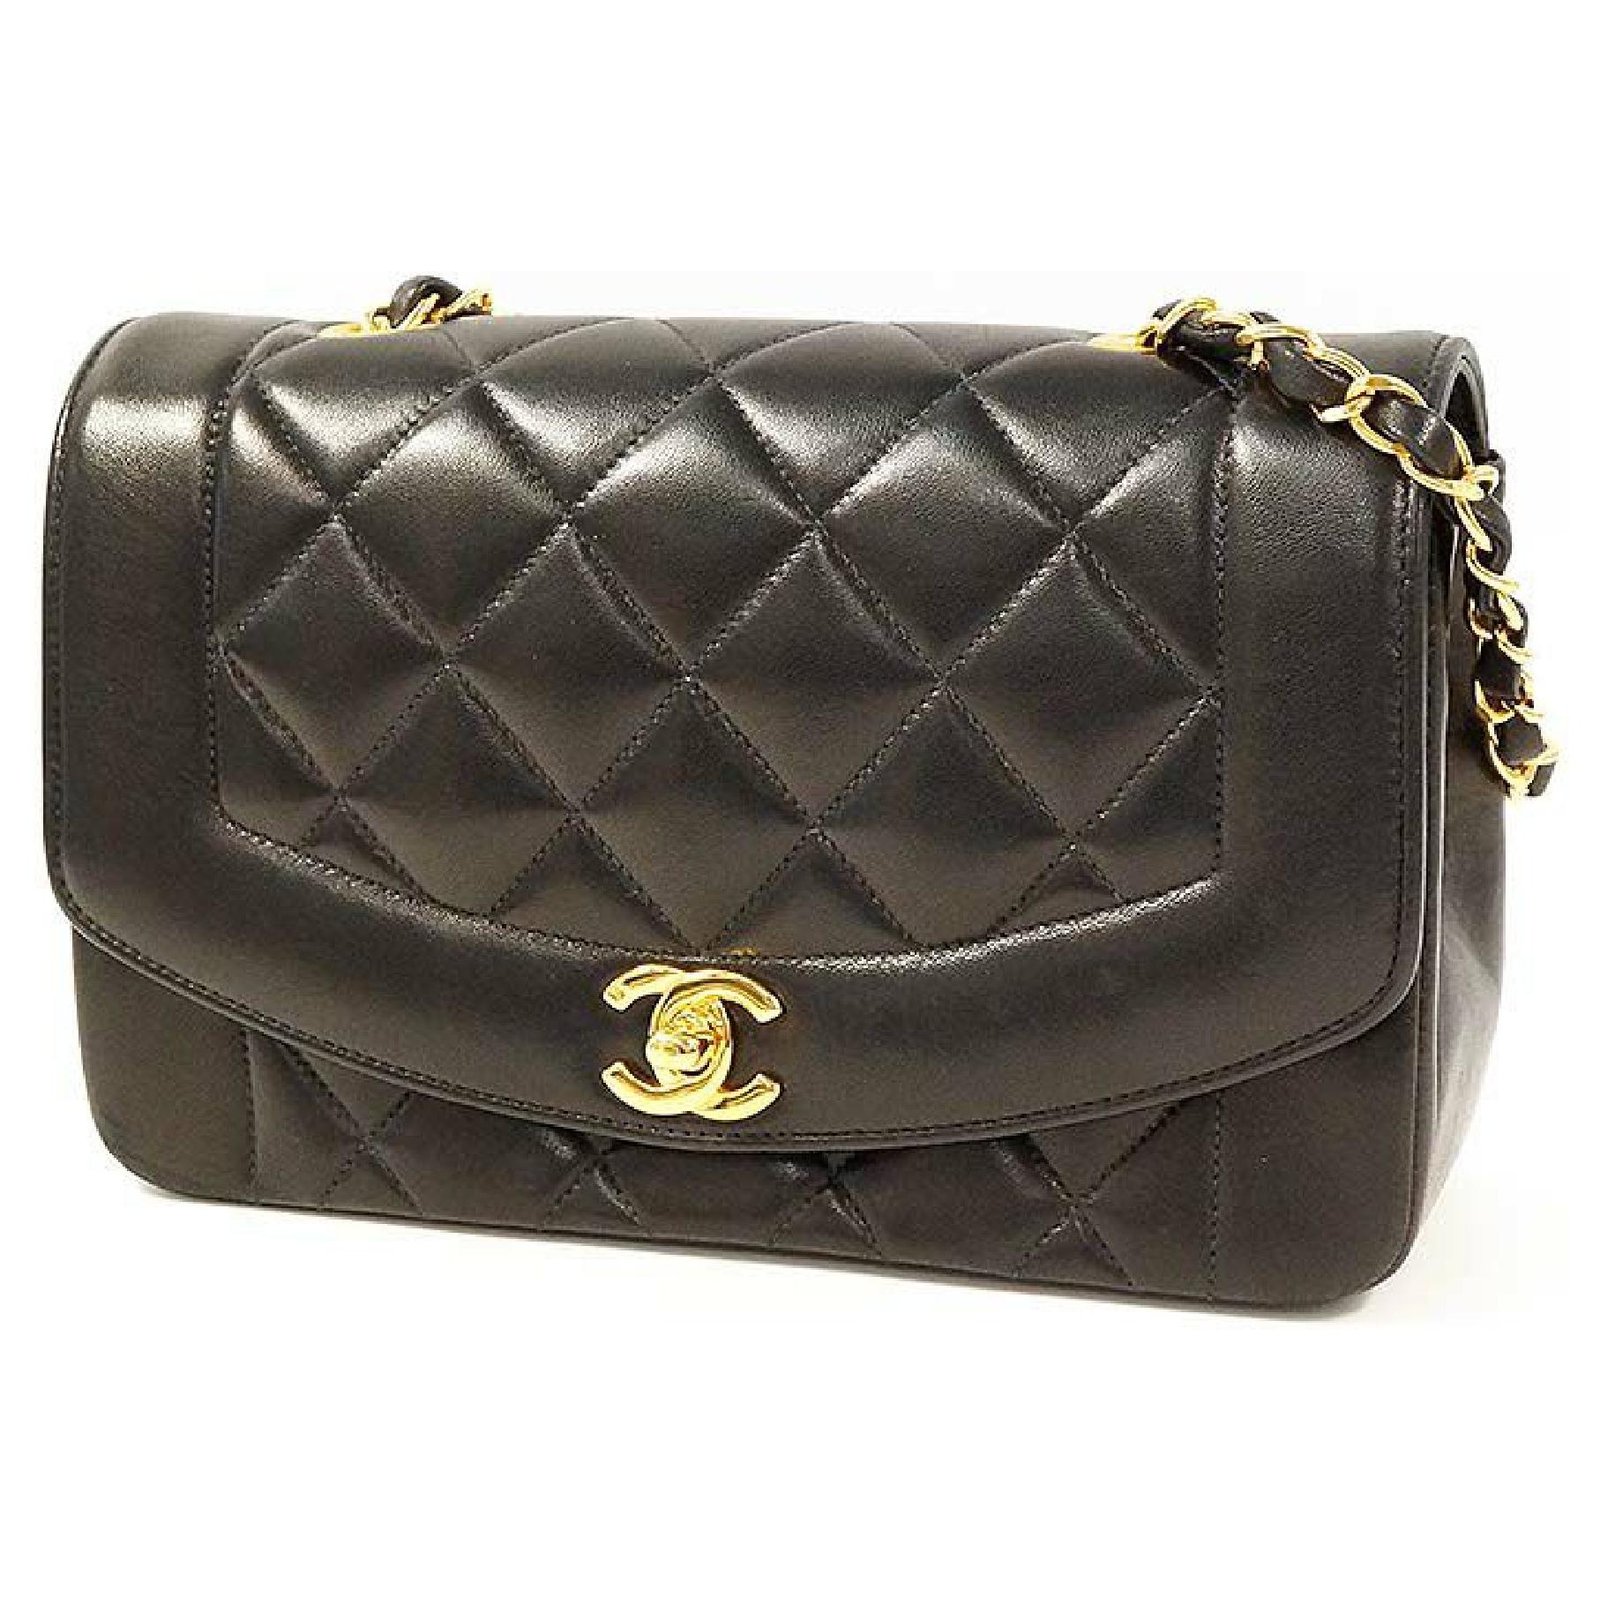 Pre-Owned CHANEL Chanel matelasse Diana 22 bag 94's lambskin